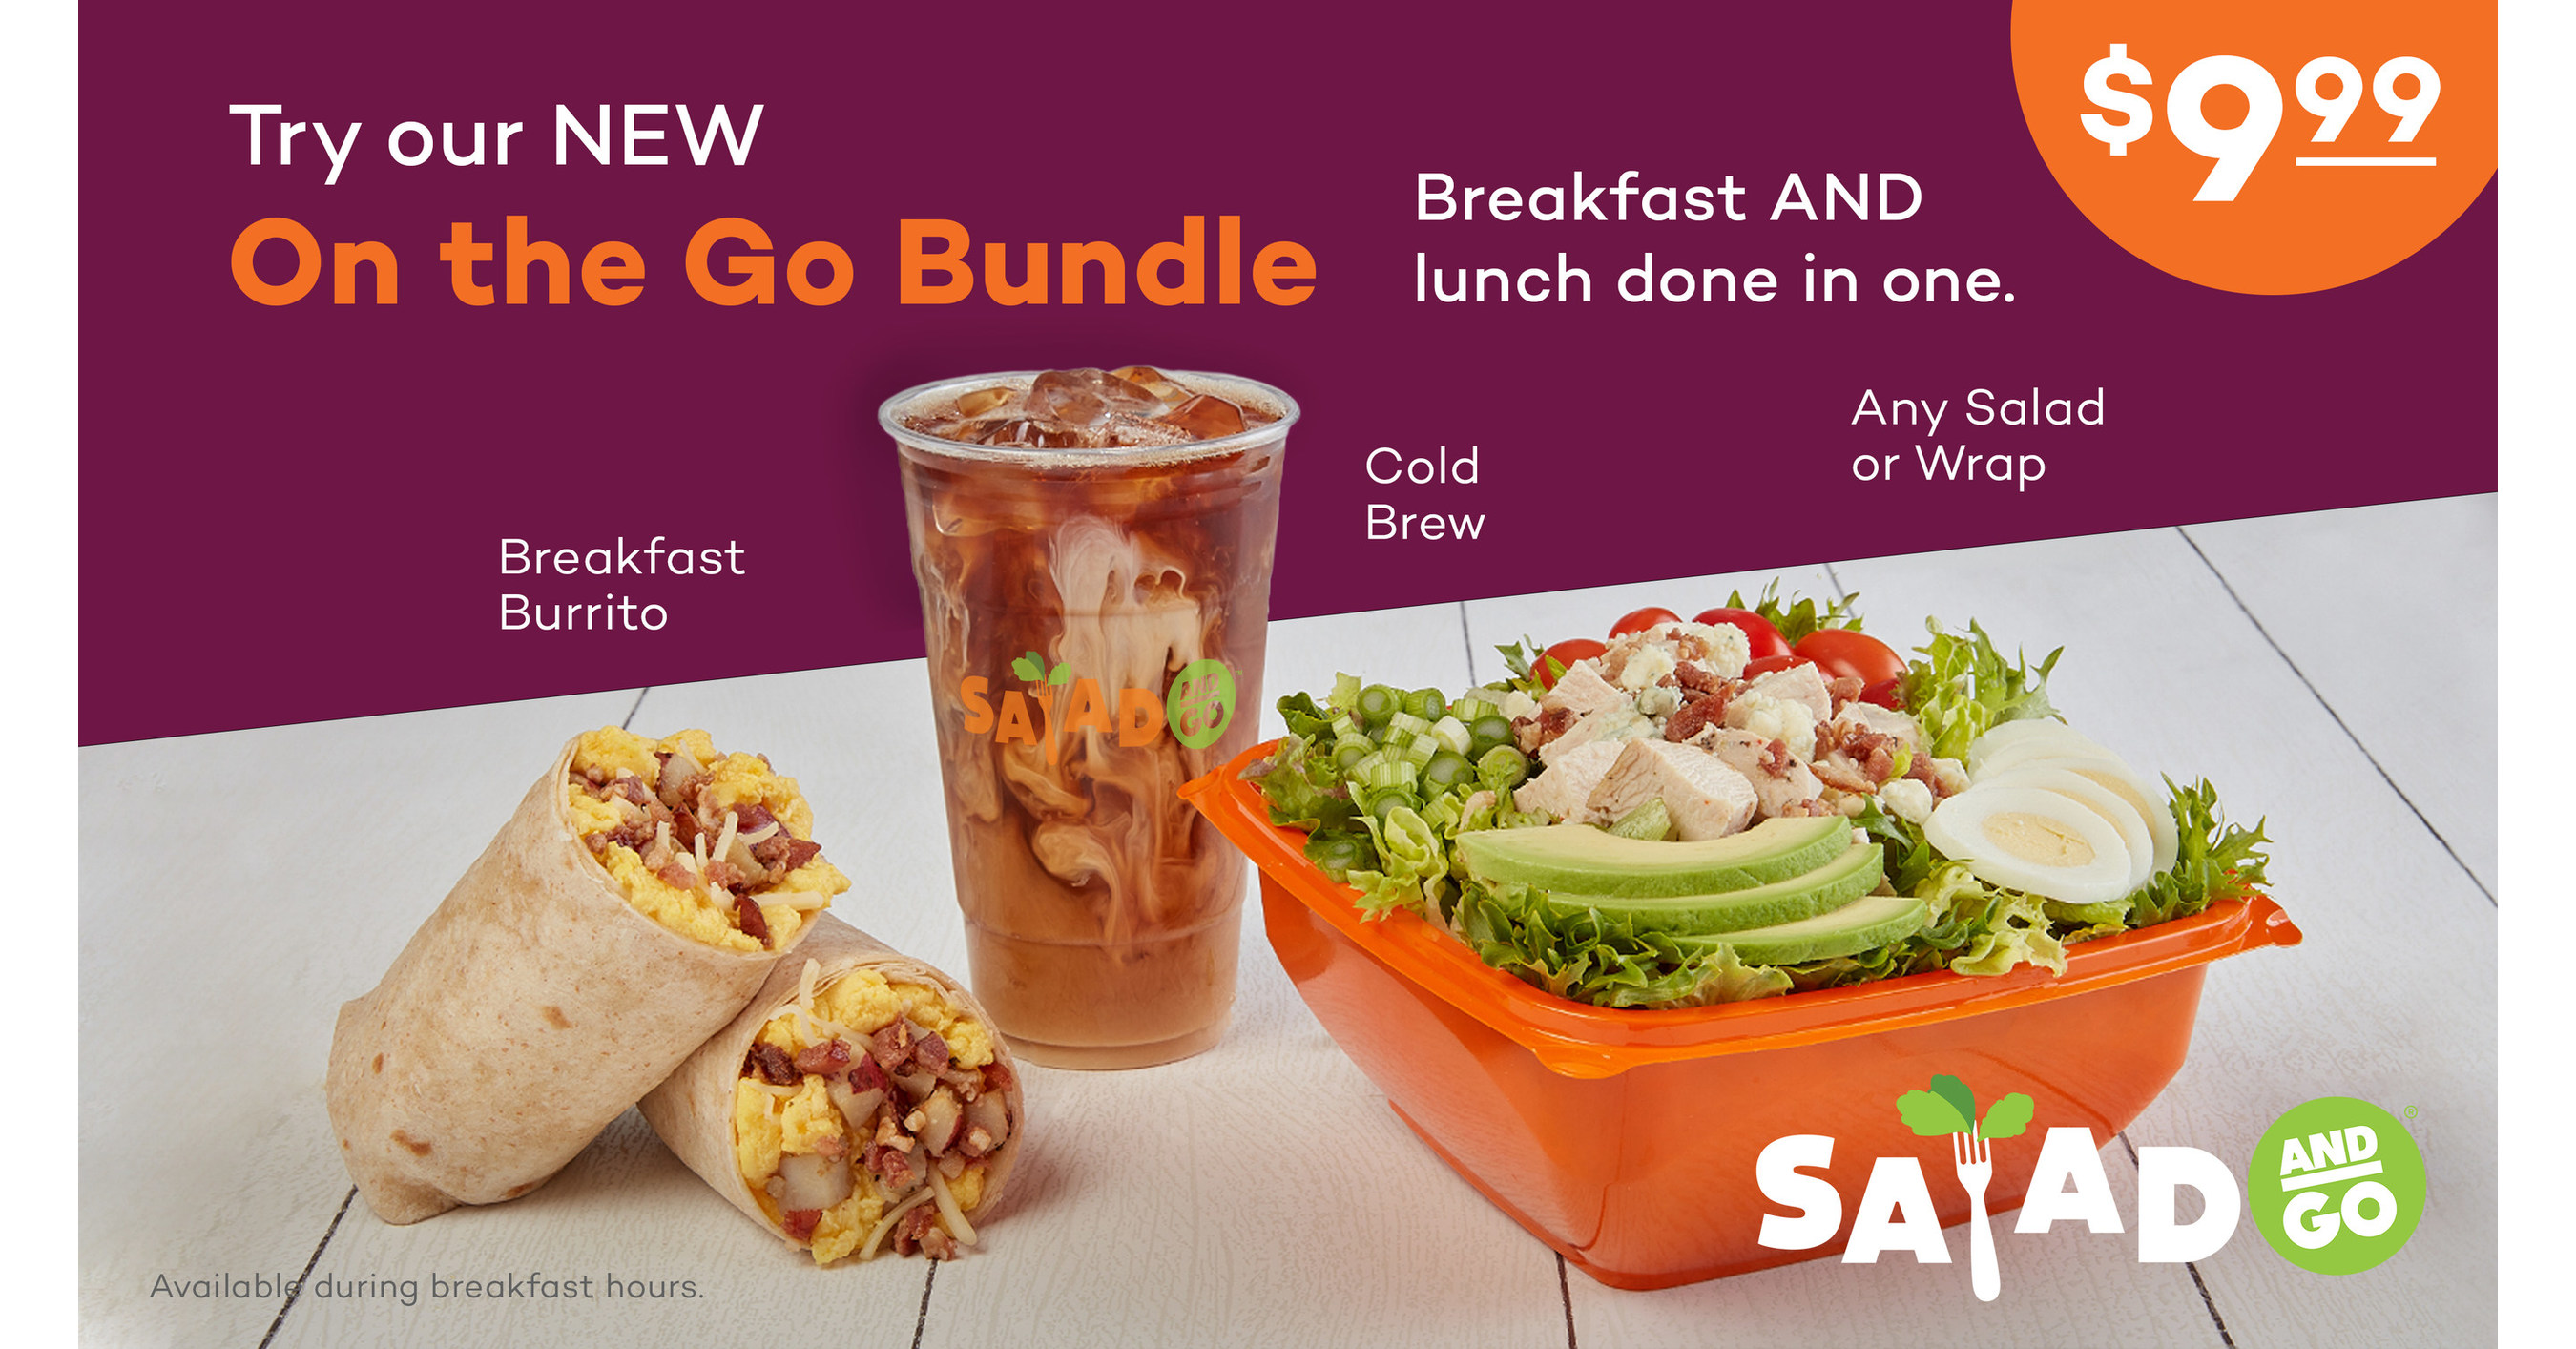 Salad and Go Bundles Breakfast and Lunch with Fresh New Offer